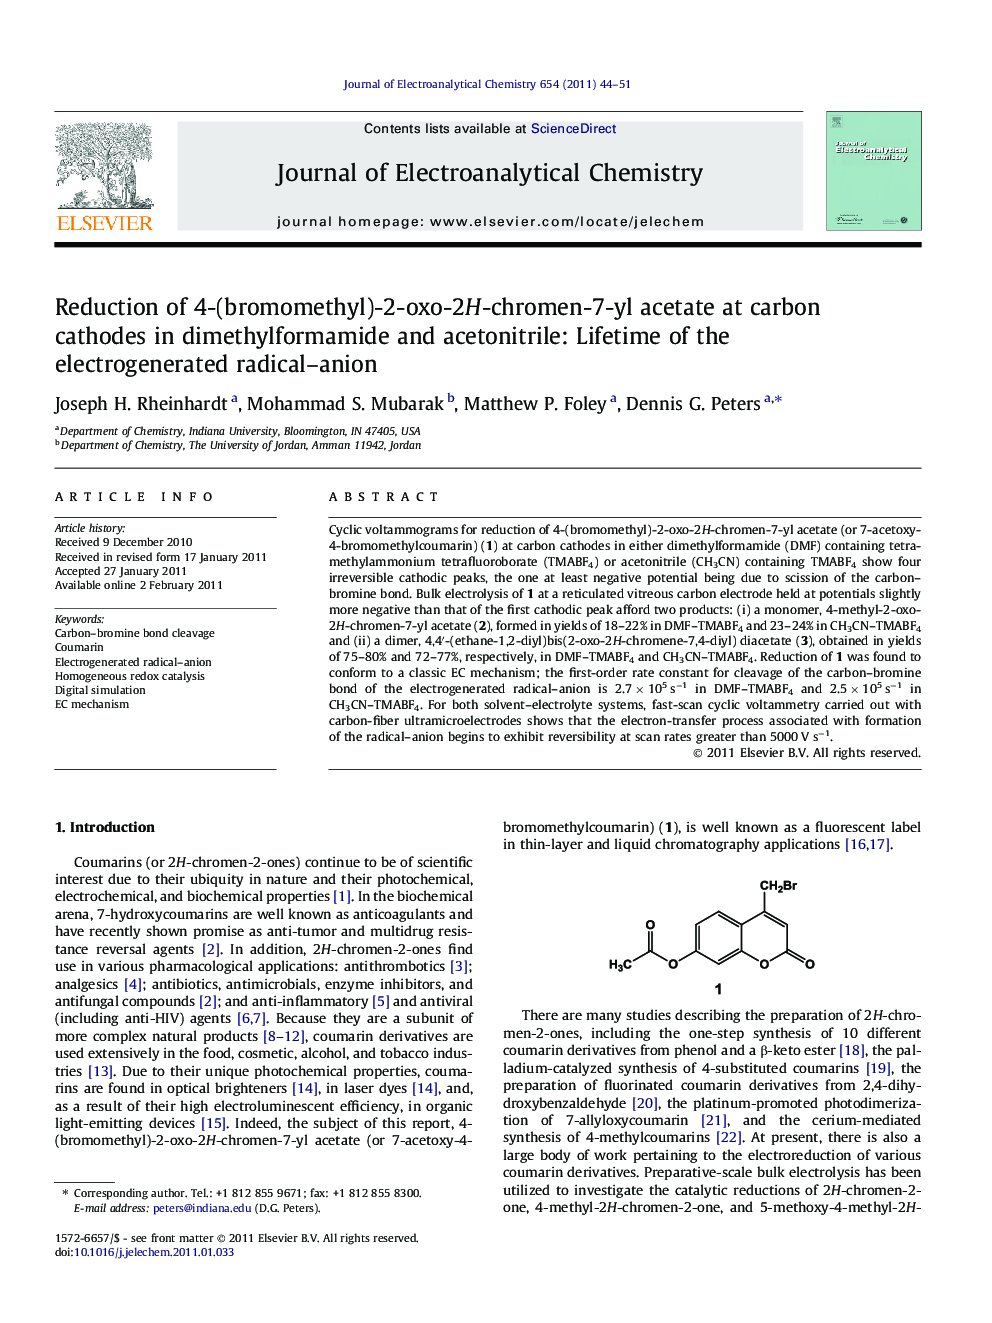 Reduction of 4-(bromomethyl)-2-oxo-2H-chromen-7-yl acetate at carbon cathodes in dimethylformamide and acetonitrile: Lifetime of the electrogenerated radical-anion